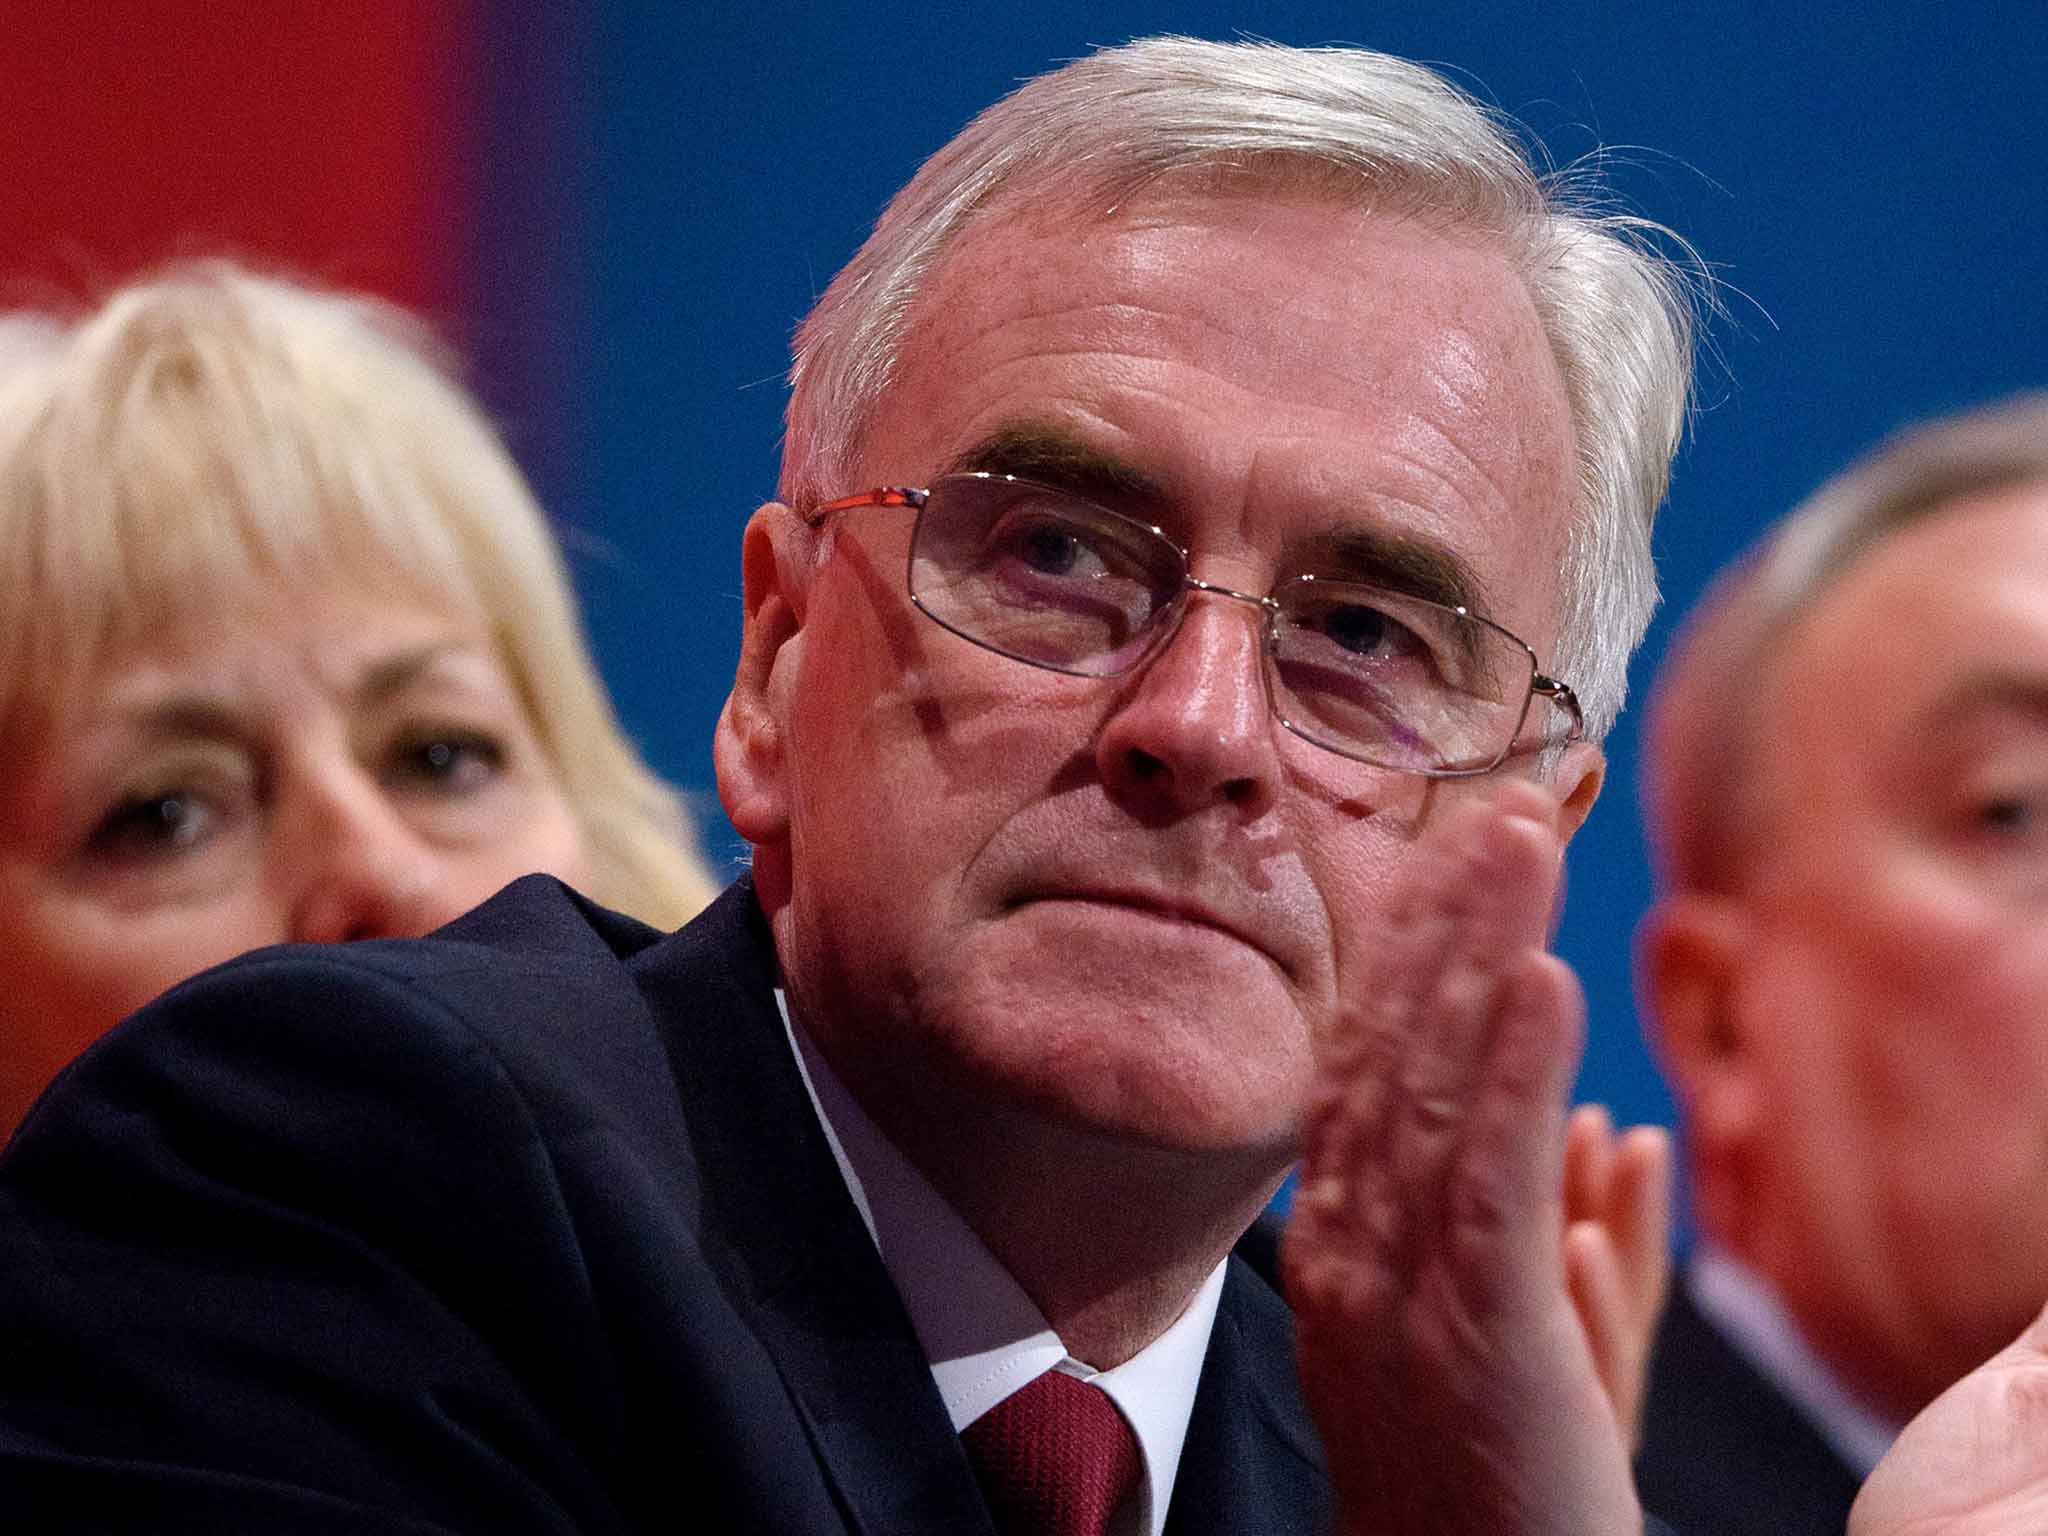 John McDonnell said the fund could be modeled on similar institutions in countries like Norway and Qatar